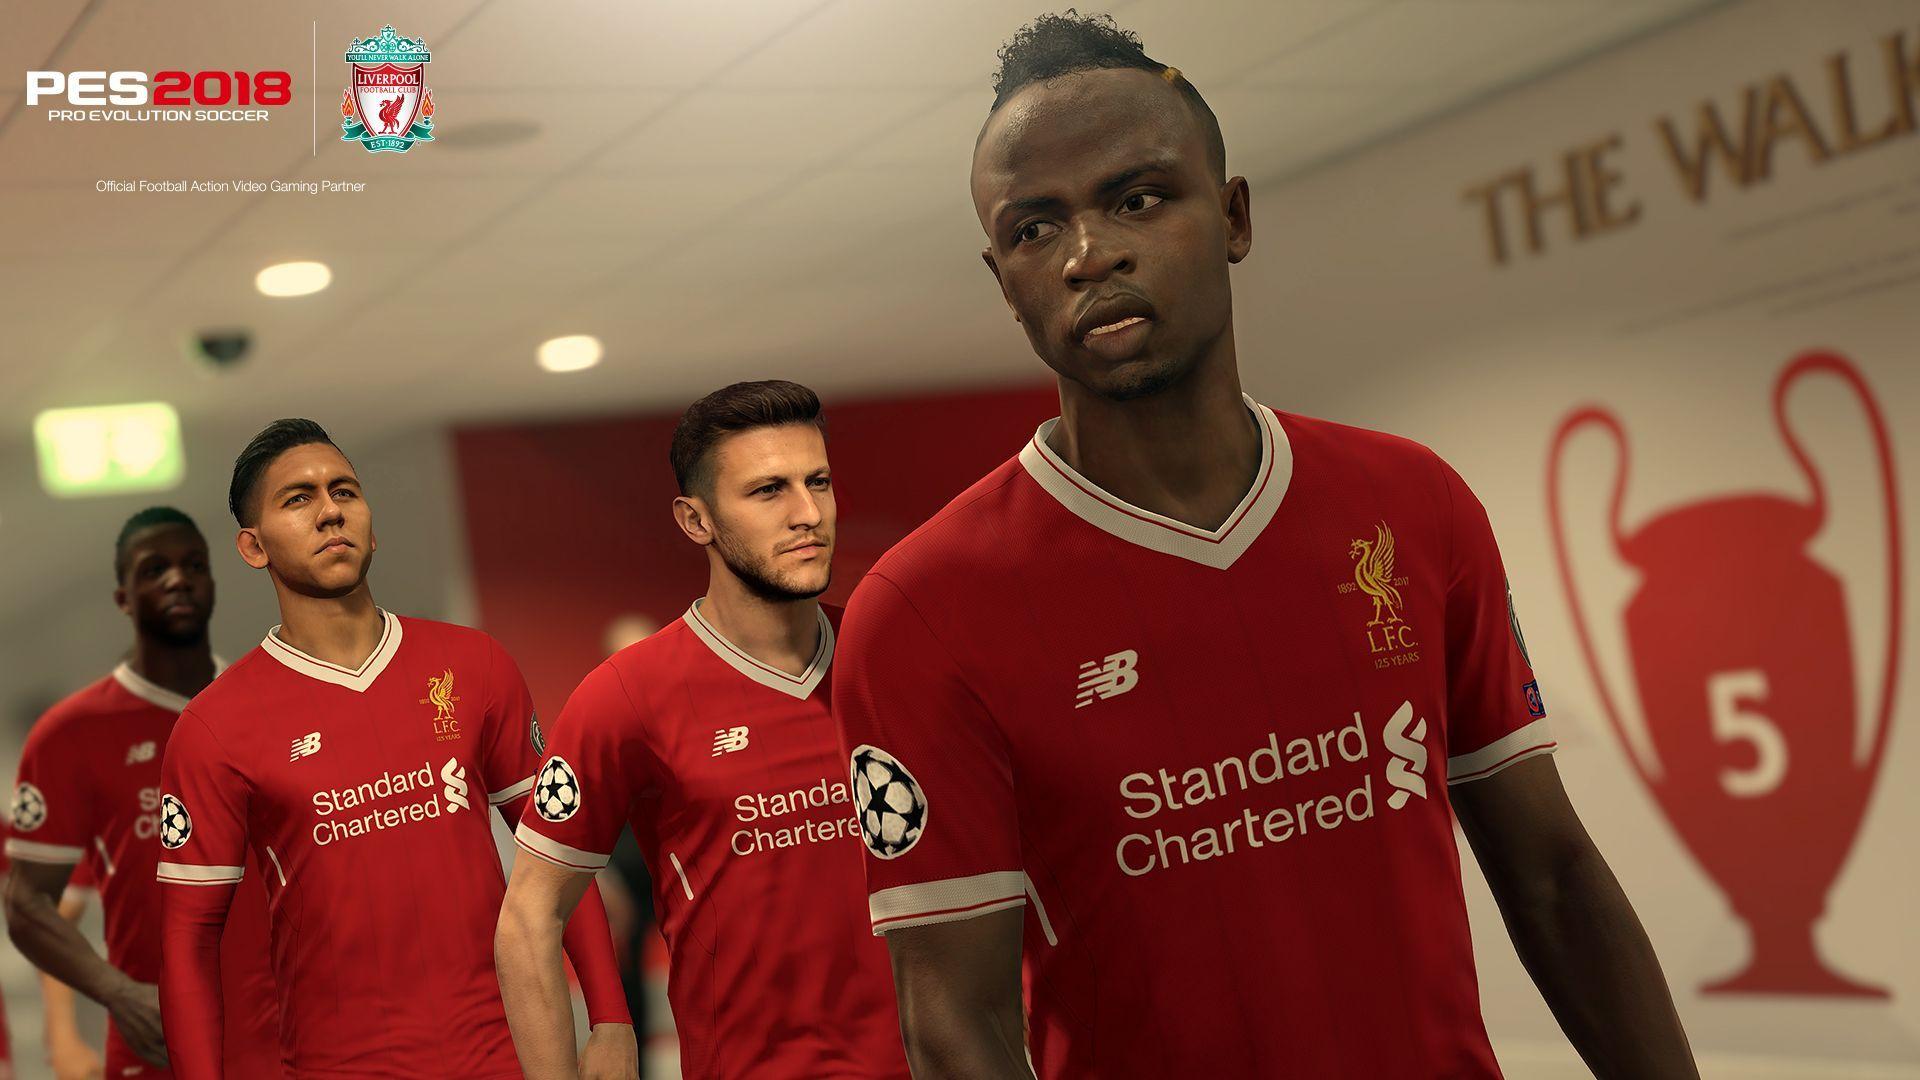 PES 2018: Liverpool legends join game